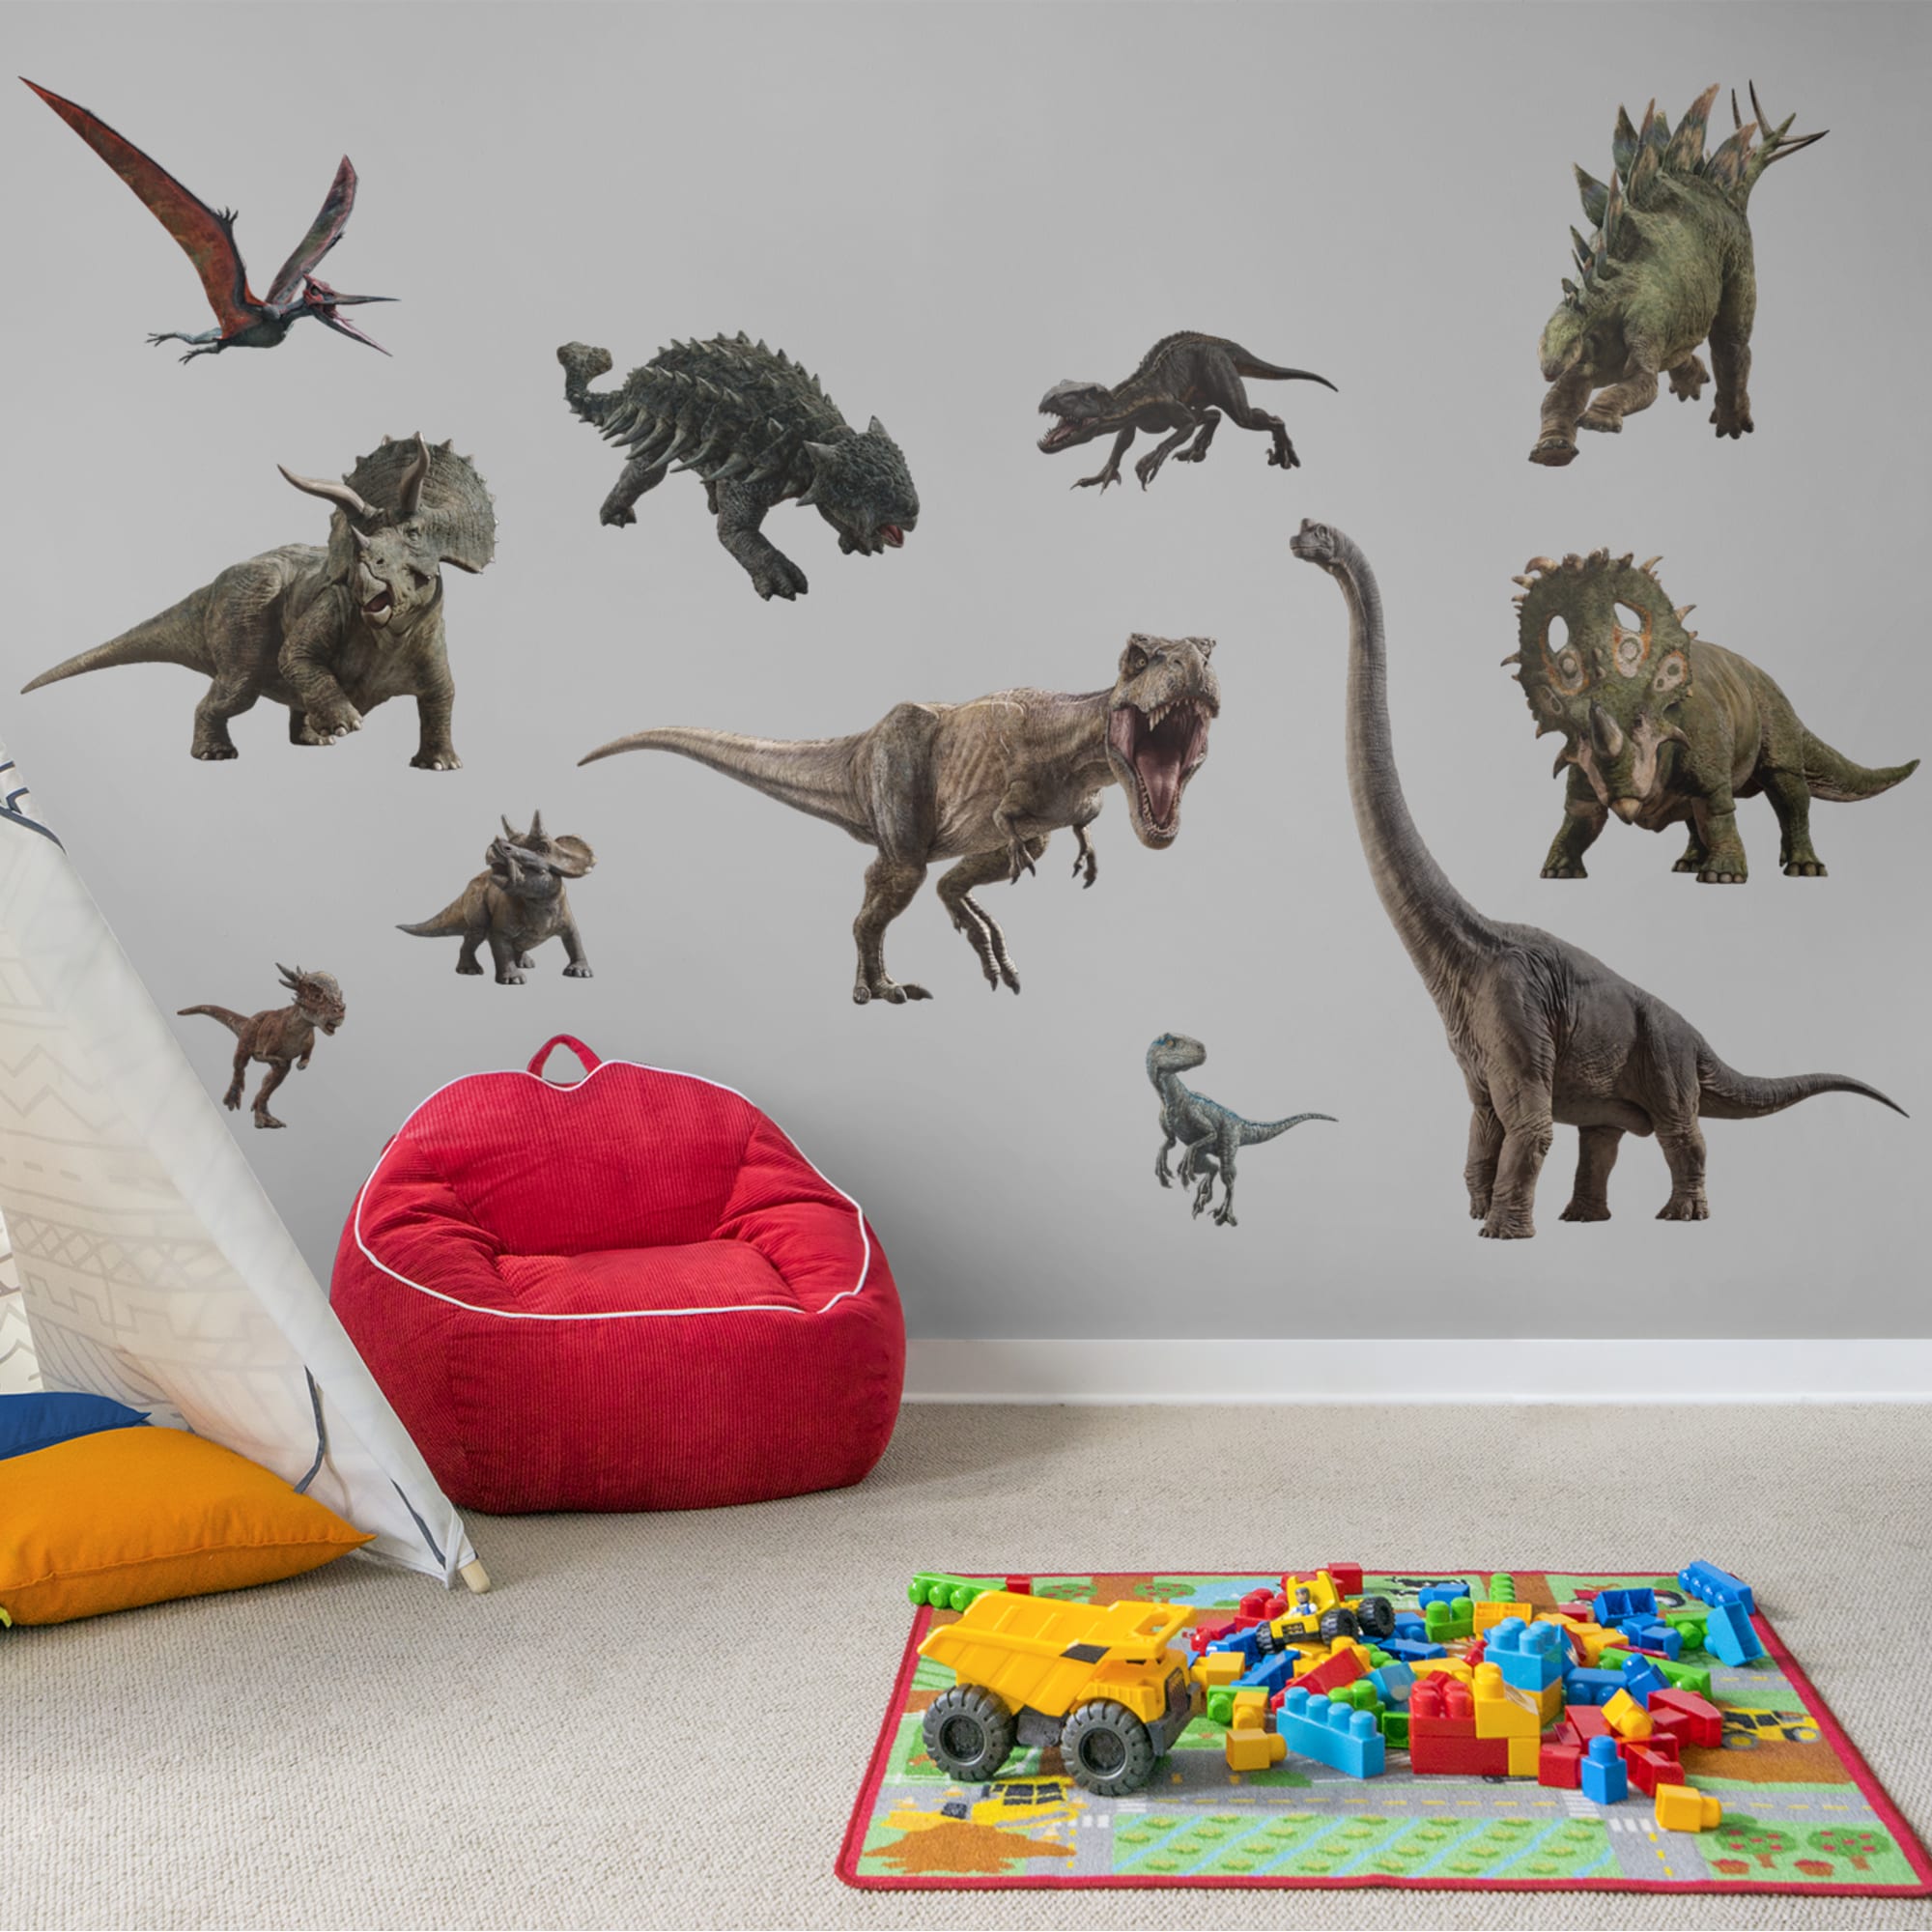 Dinosaurs Collection - Jurassic World: Fallen Kingdom - Officially Licensed Removable Wall Decal 35.0"W x 25.0"H by Fathead | Vi